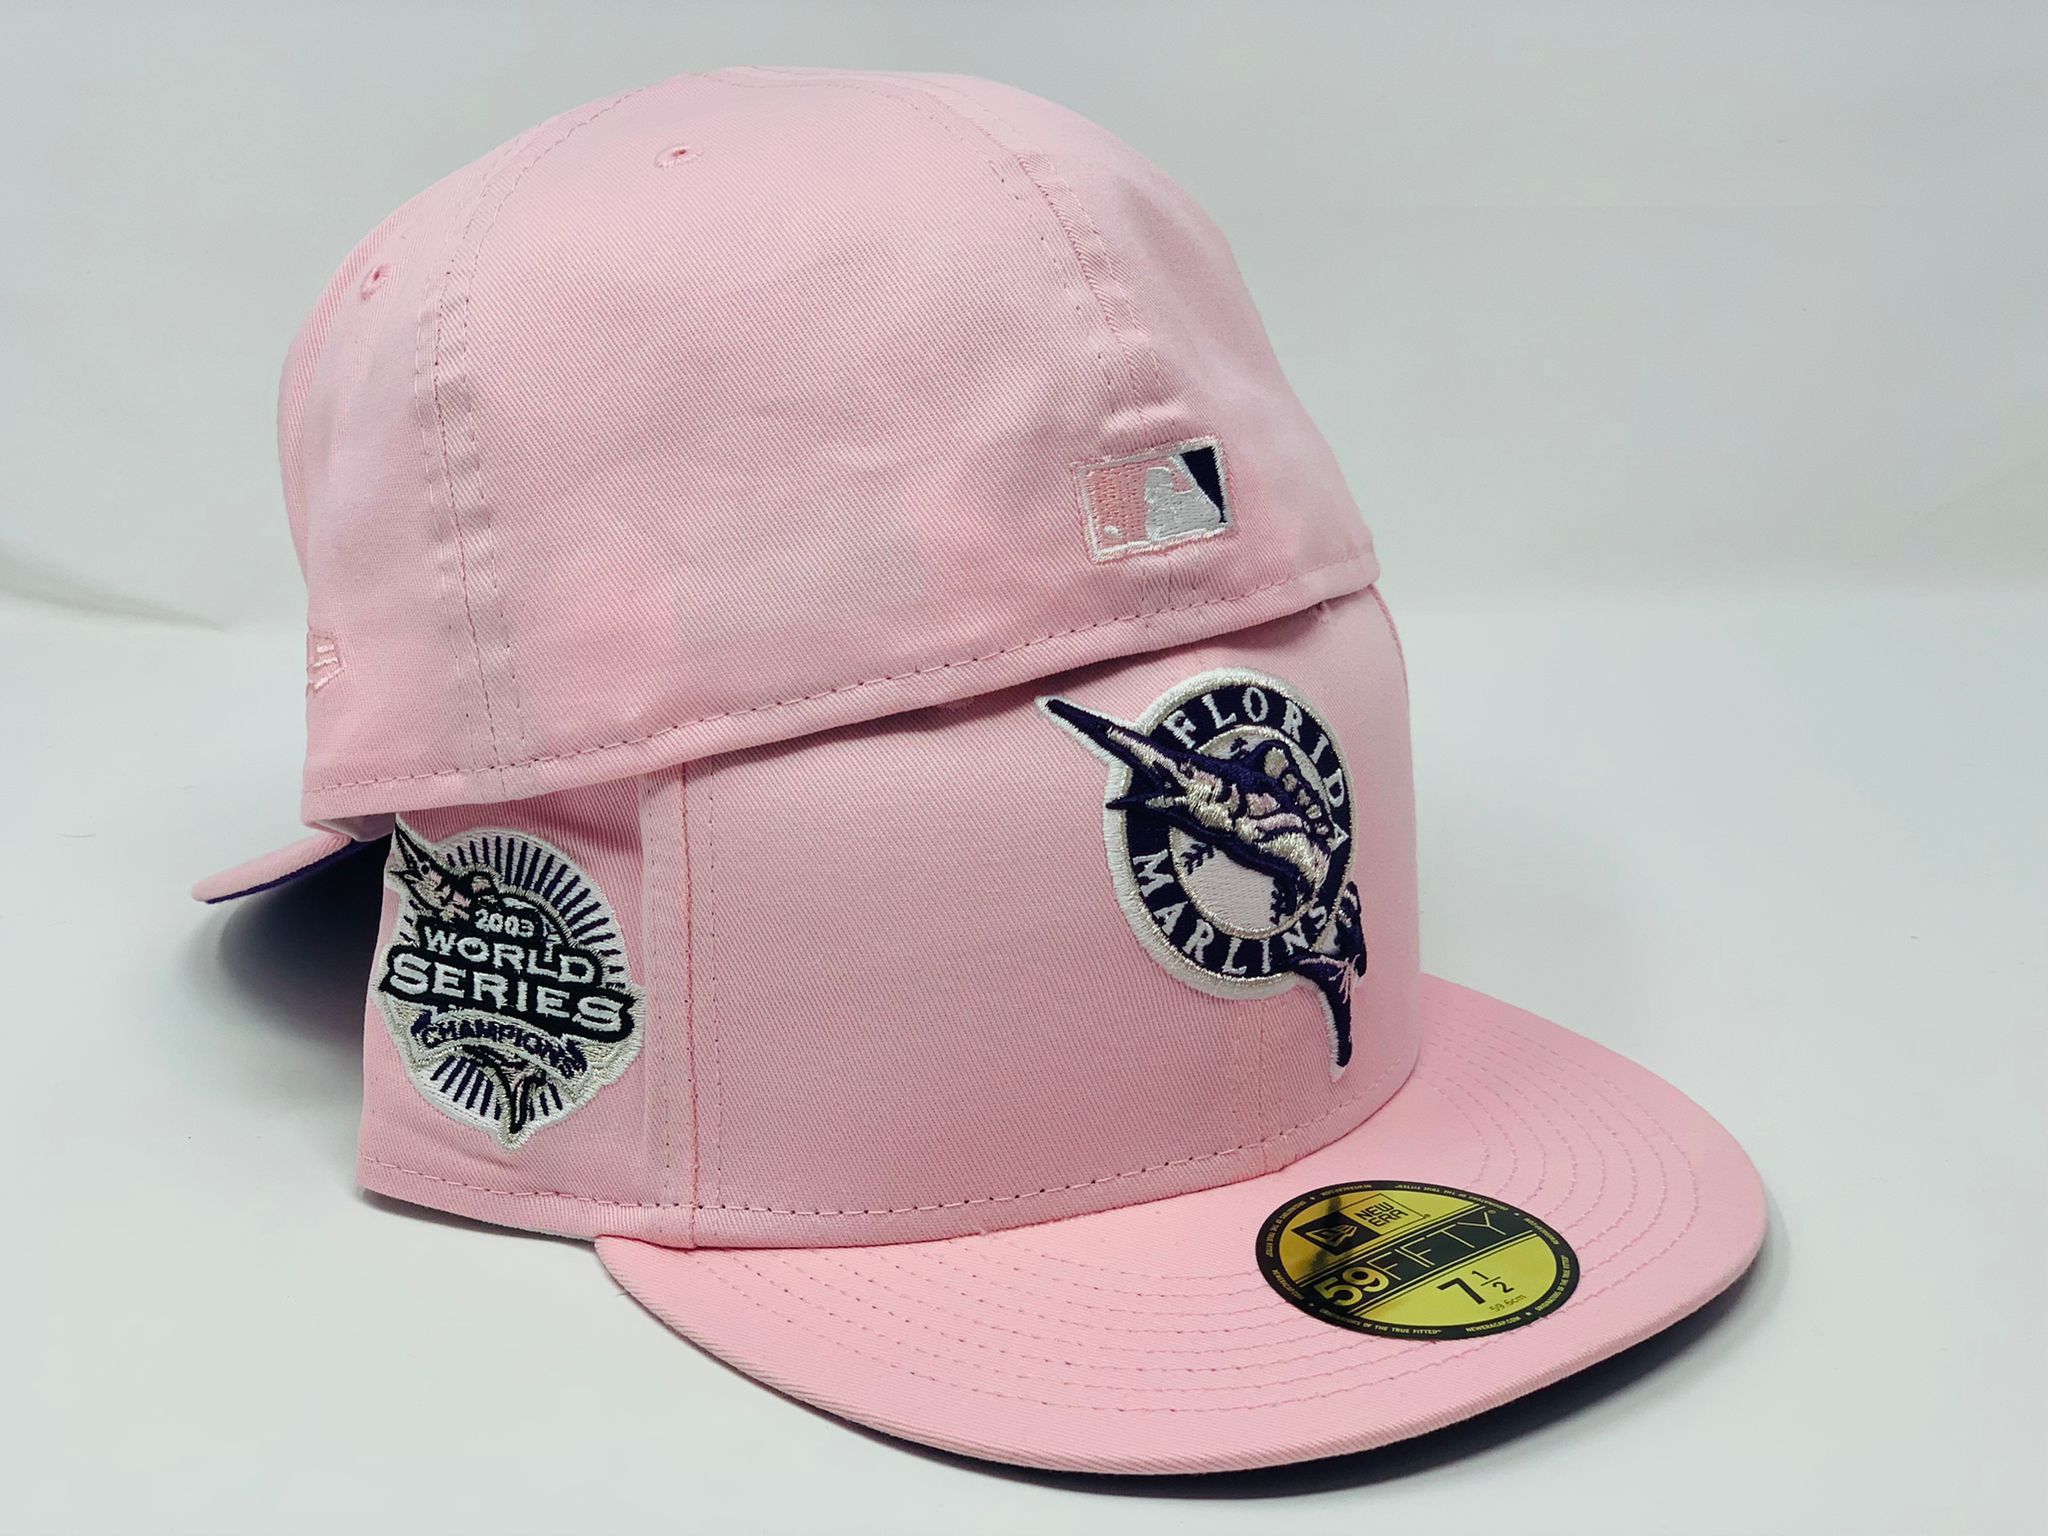 Florida Marlins New Era 2003 World Series Champions Passion 59FIFTY Fitted  Hat - Black/Pink